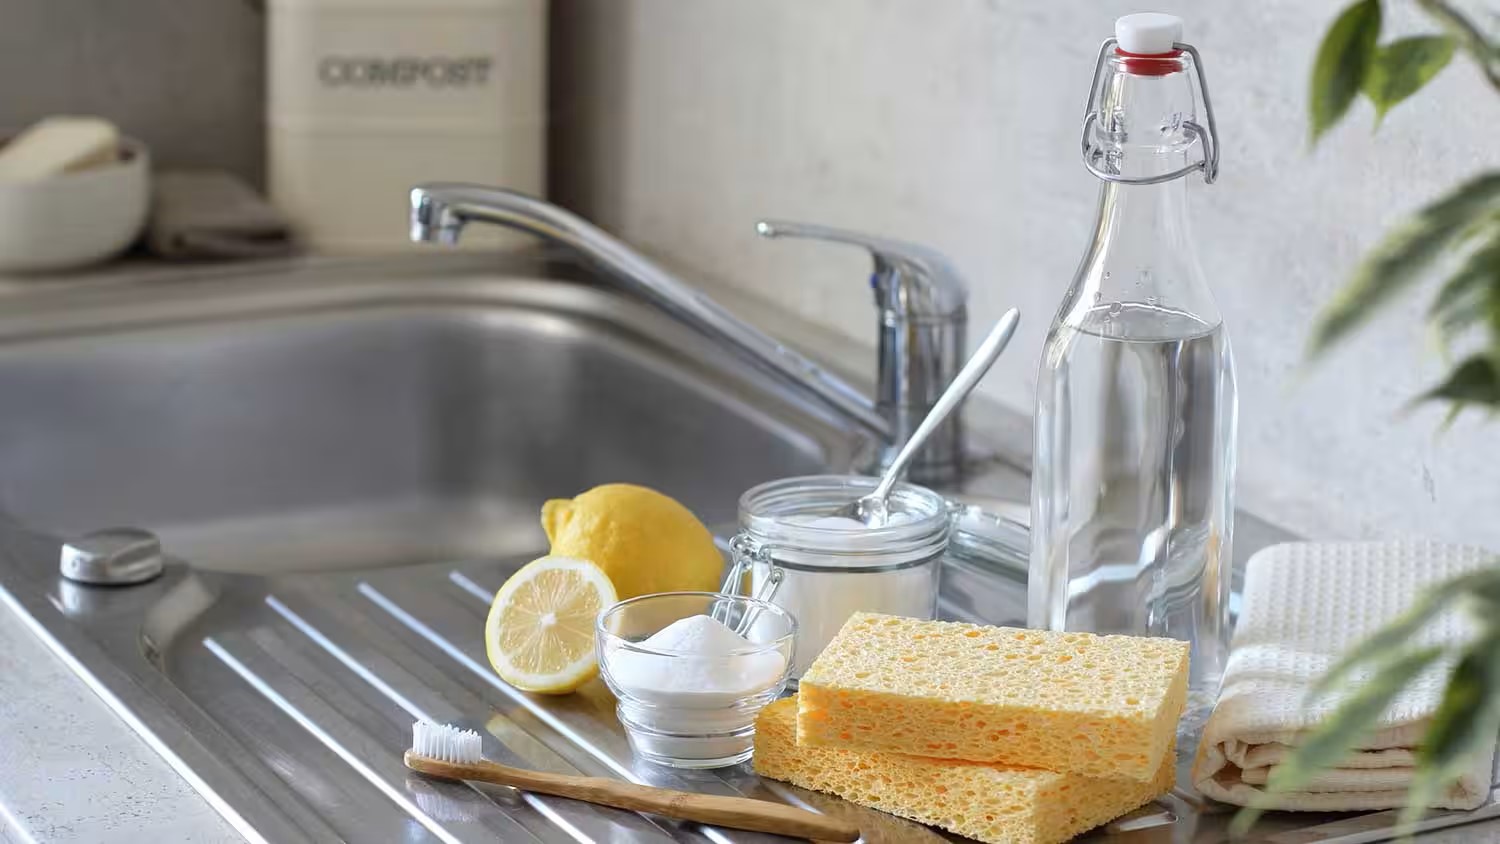 How To Remove Rust From Stainless Steel Sink